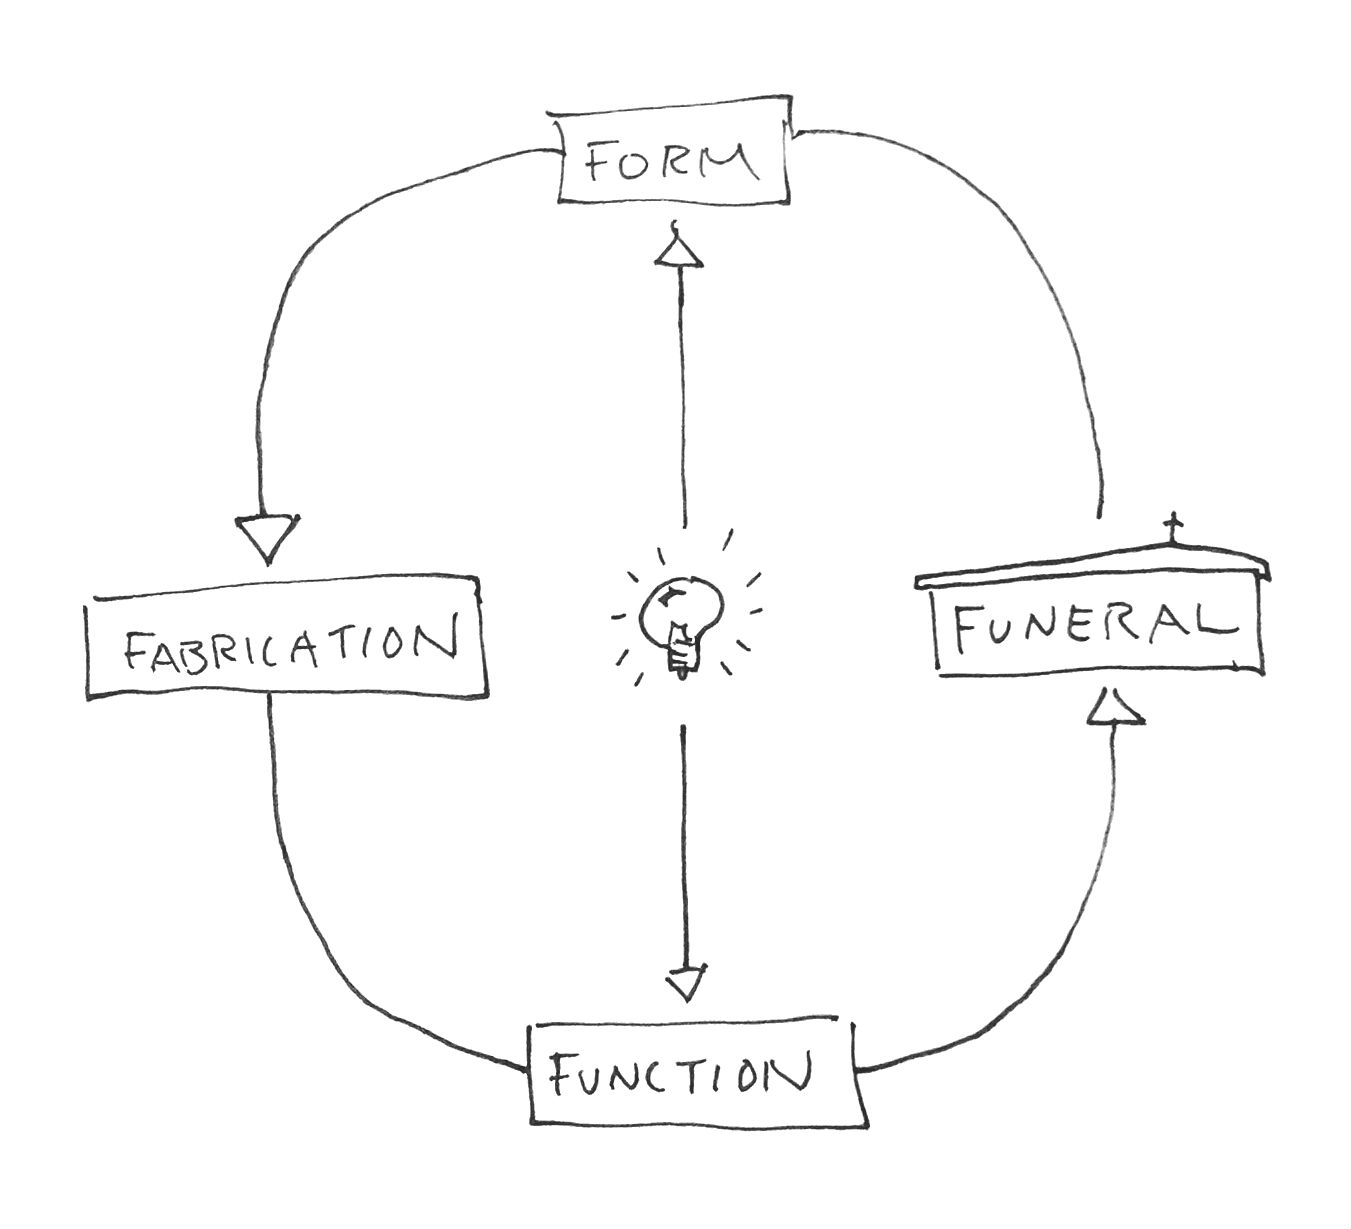 From Fabrication to Funeral